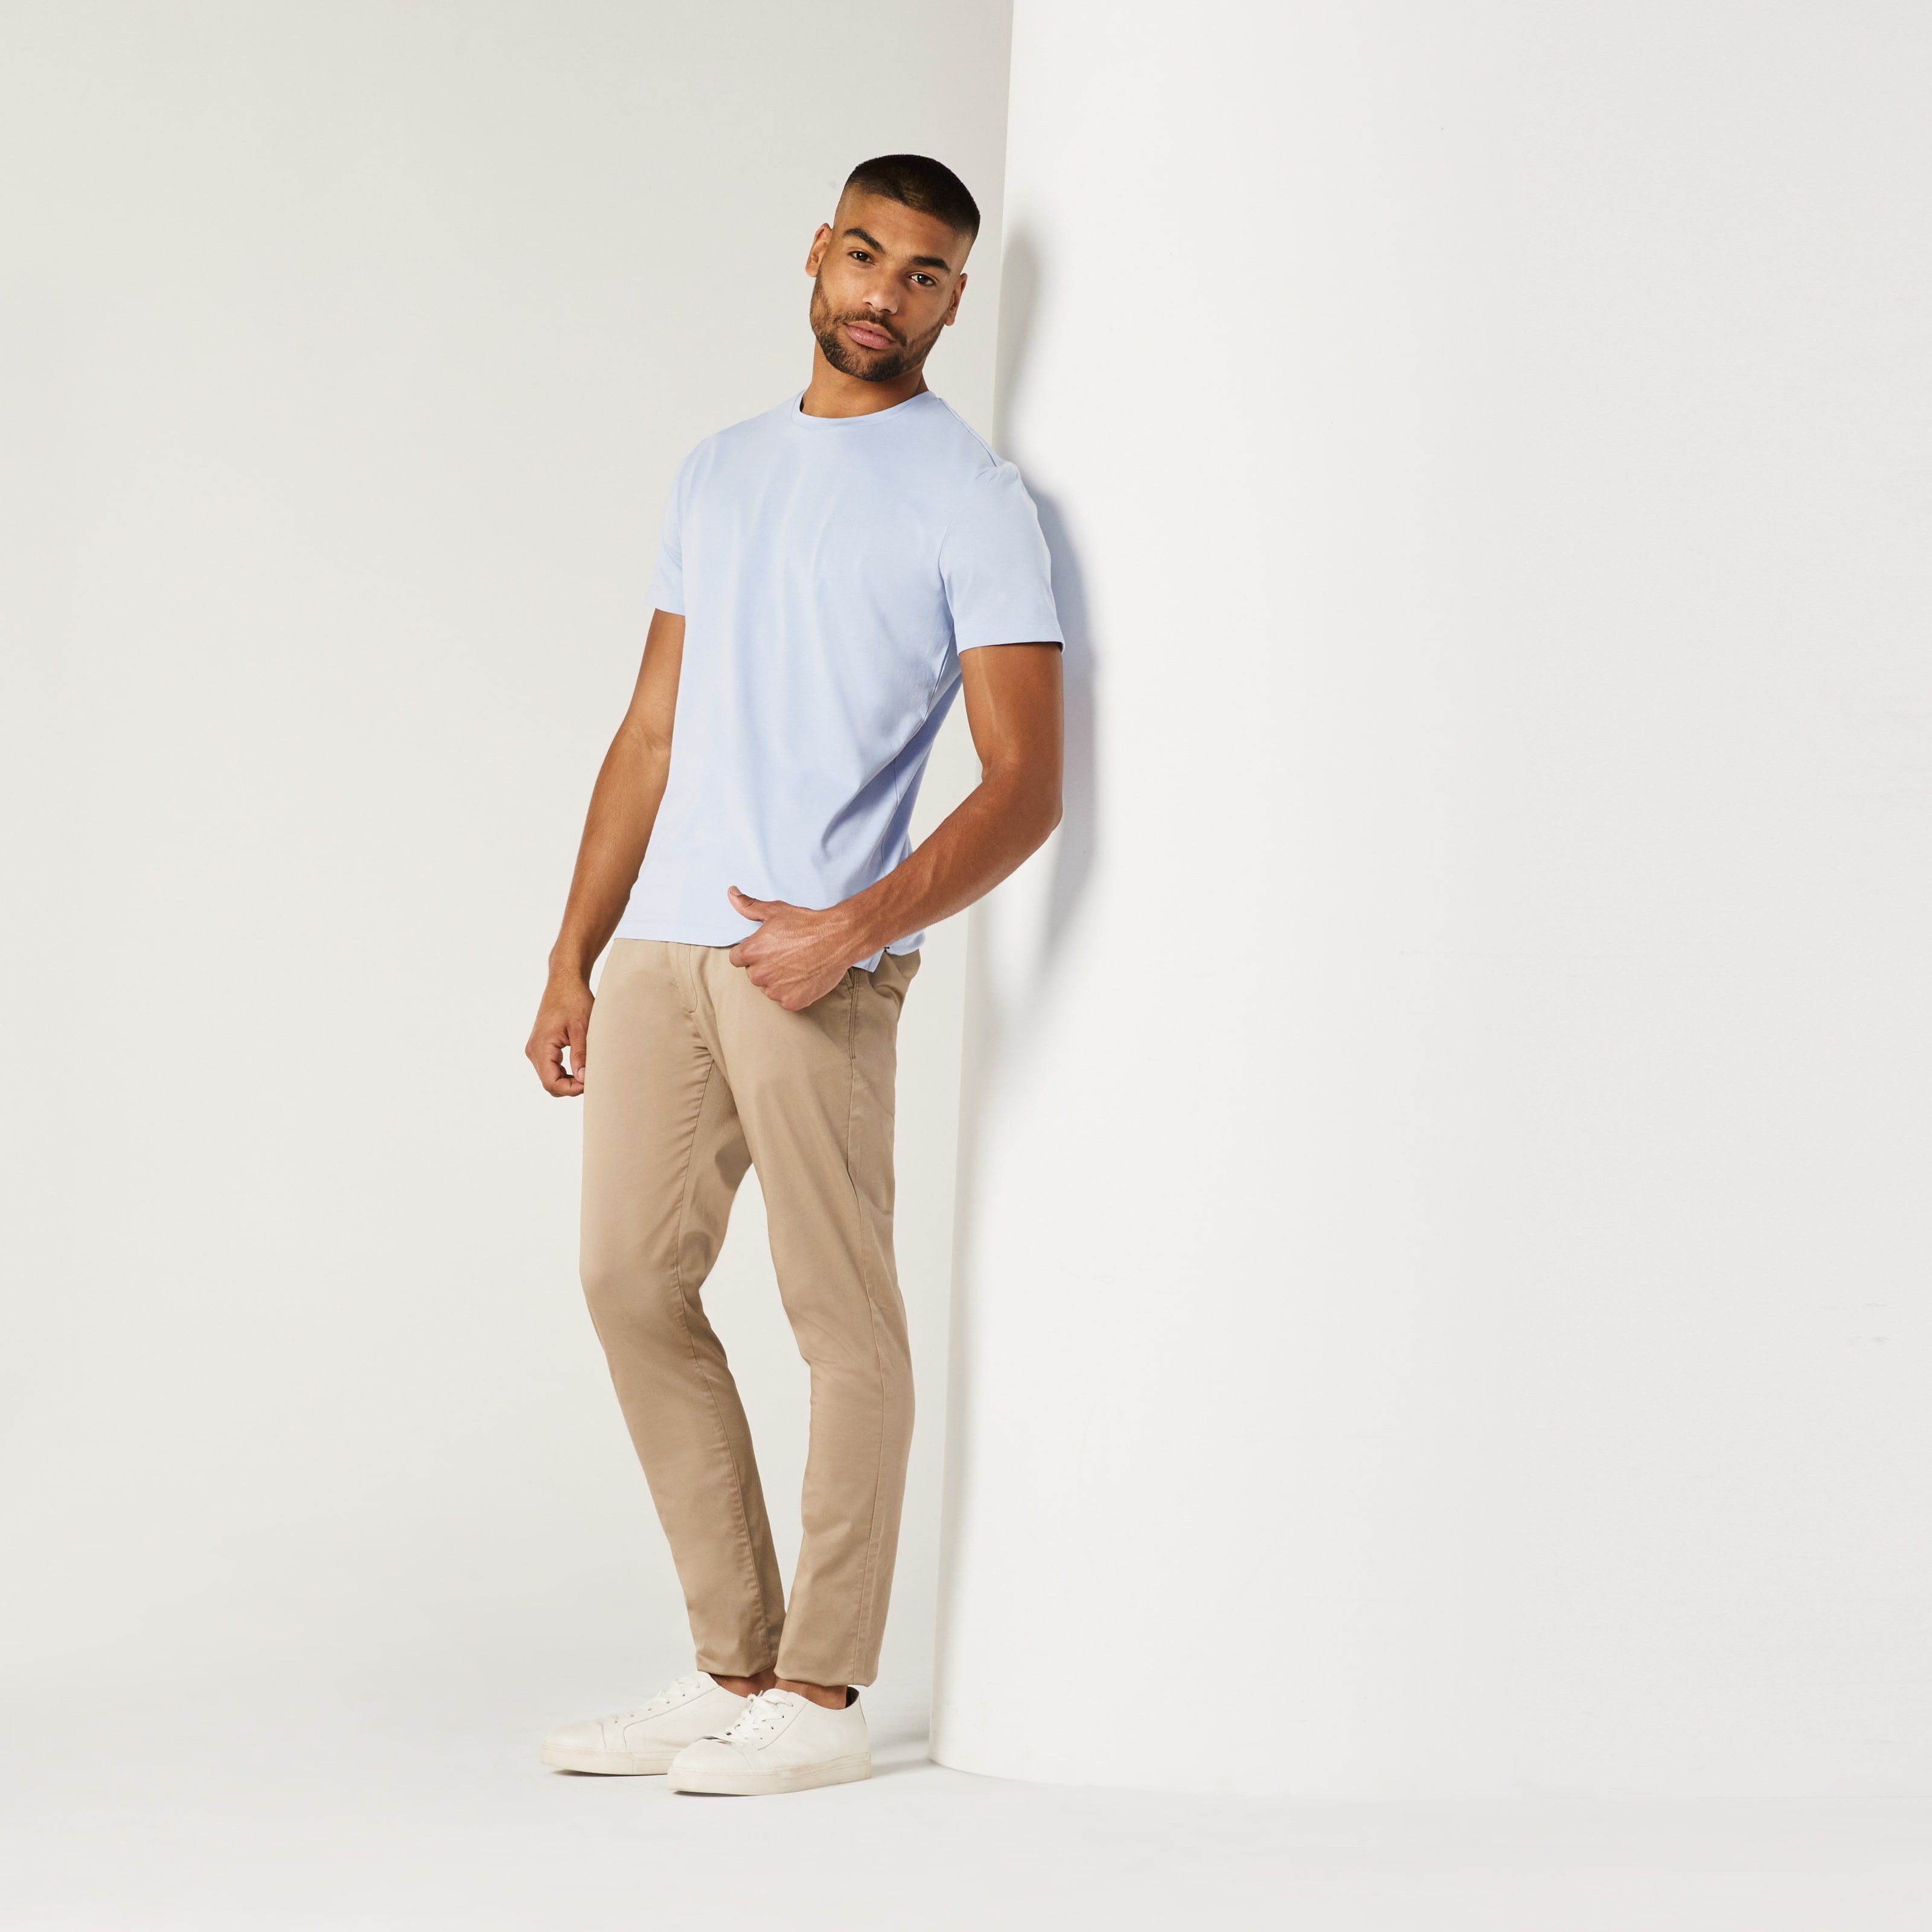 Beige Pants with Light Blue Shirt Summer Outfits For Men (410 ideas &  outfits) | Lookastic